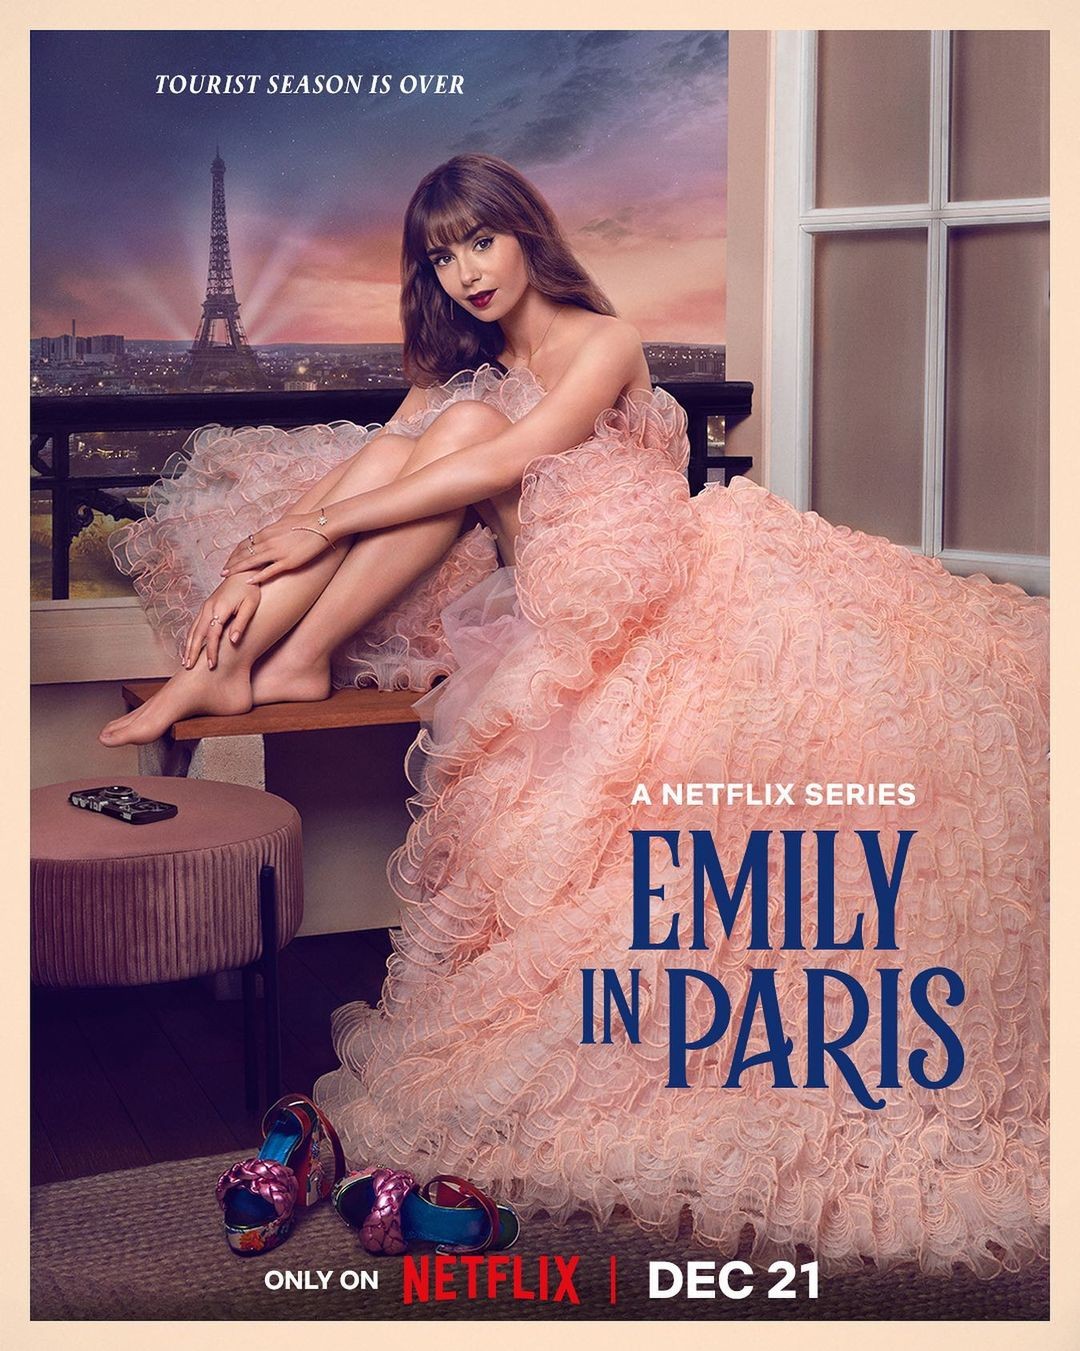 Everything I Want to Buy After Watching 'Emily in Paris